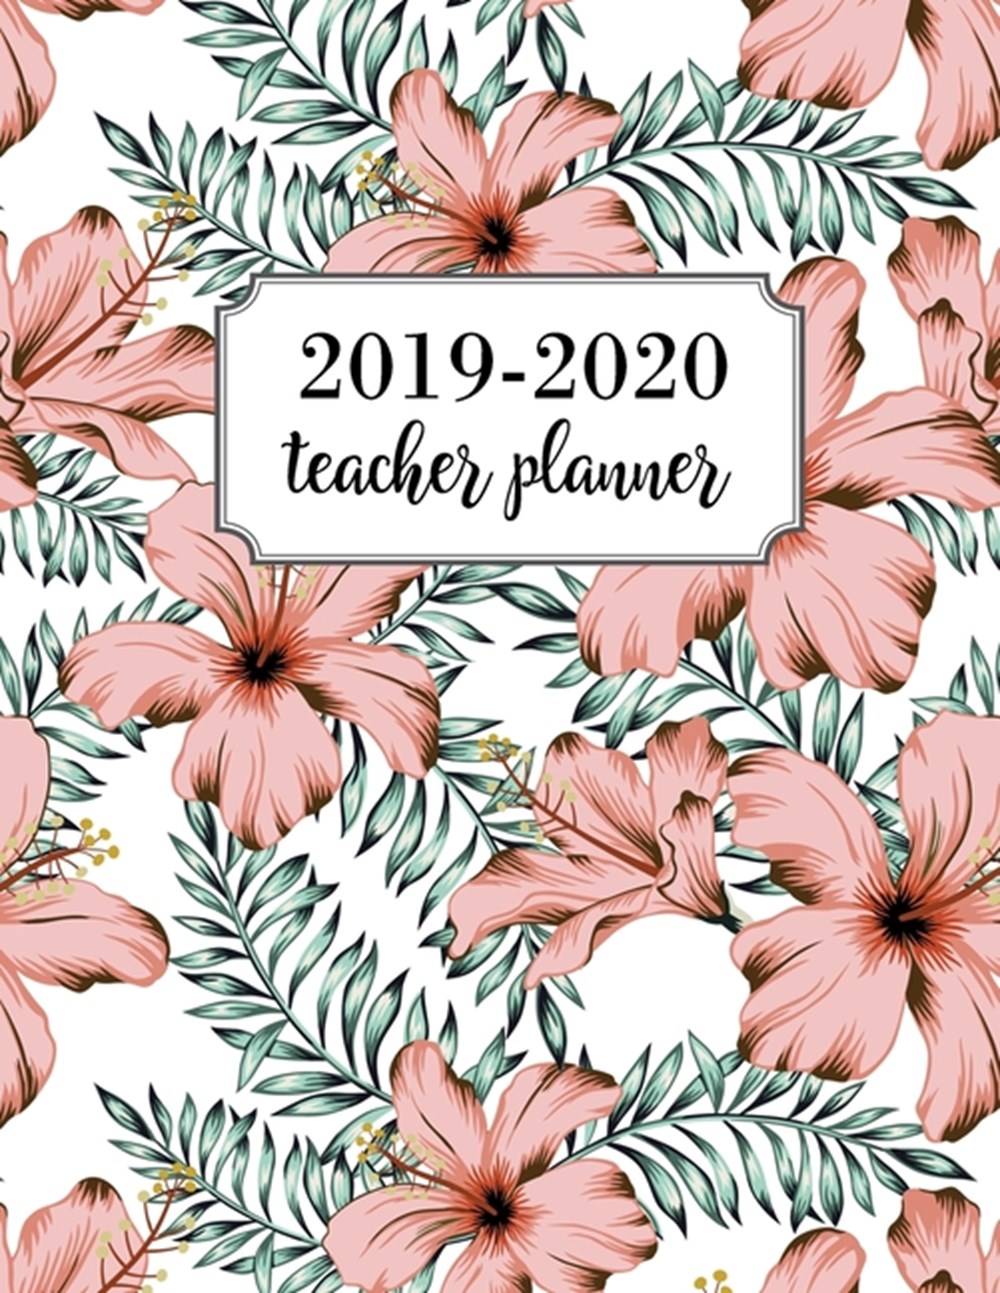 Teacher Planner 2019-2020 Lesson Planner for Academic Year July 2019 - June 2020, 7 Subject Weekly L